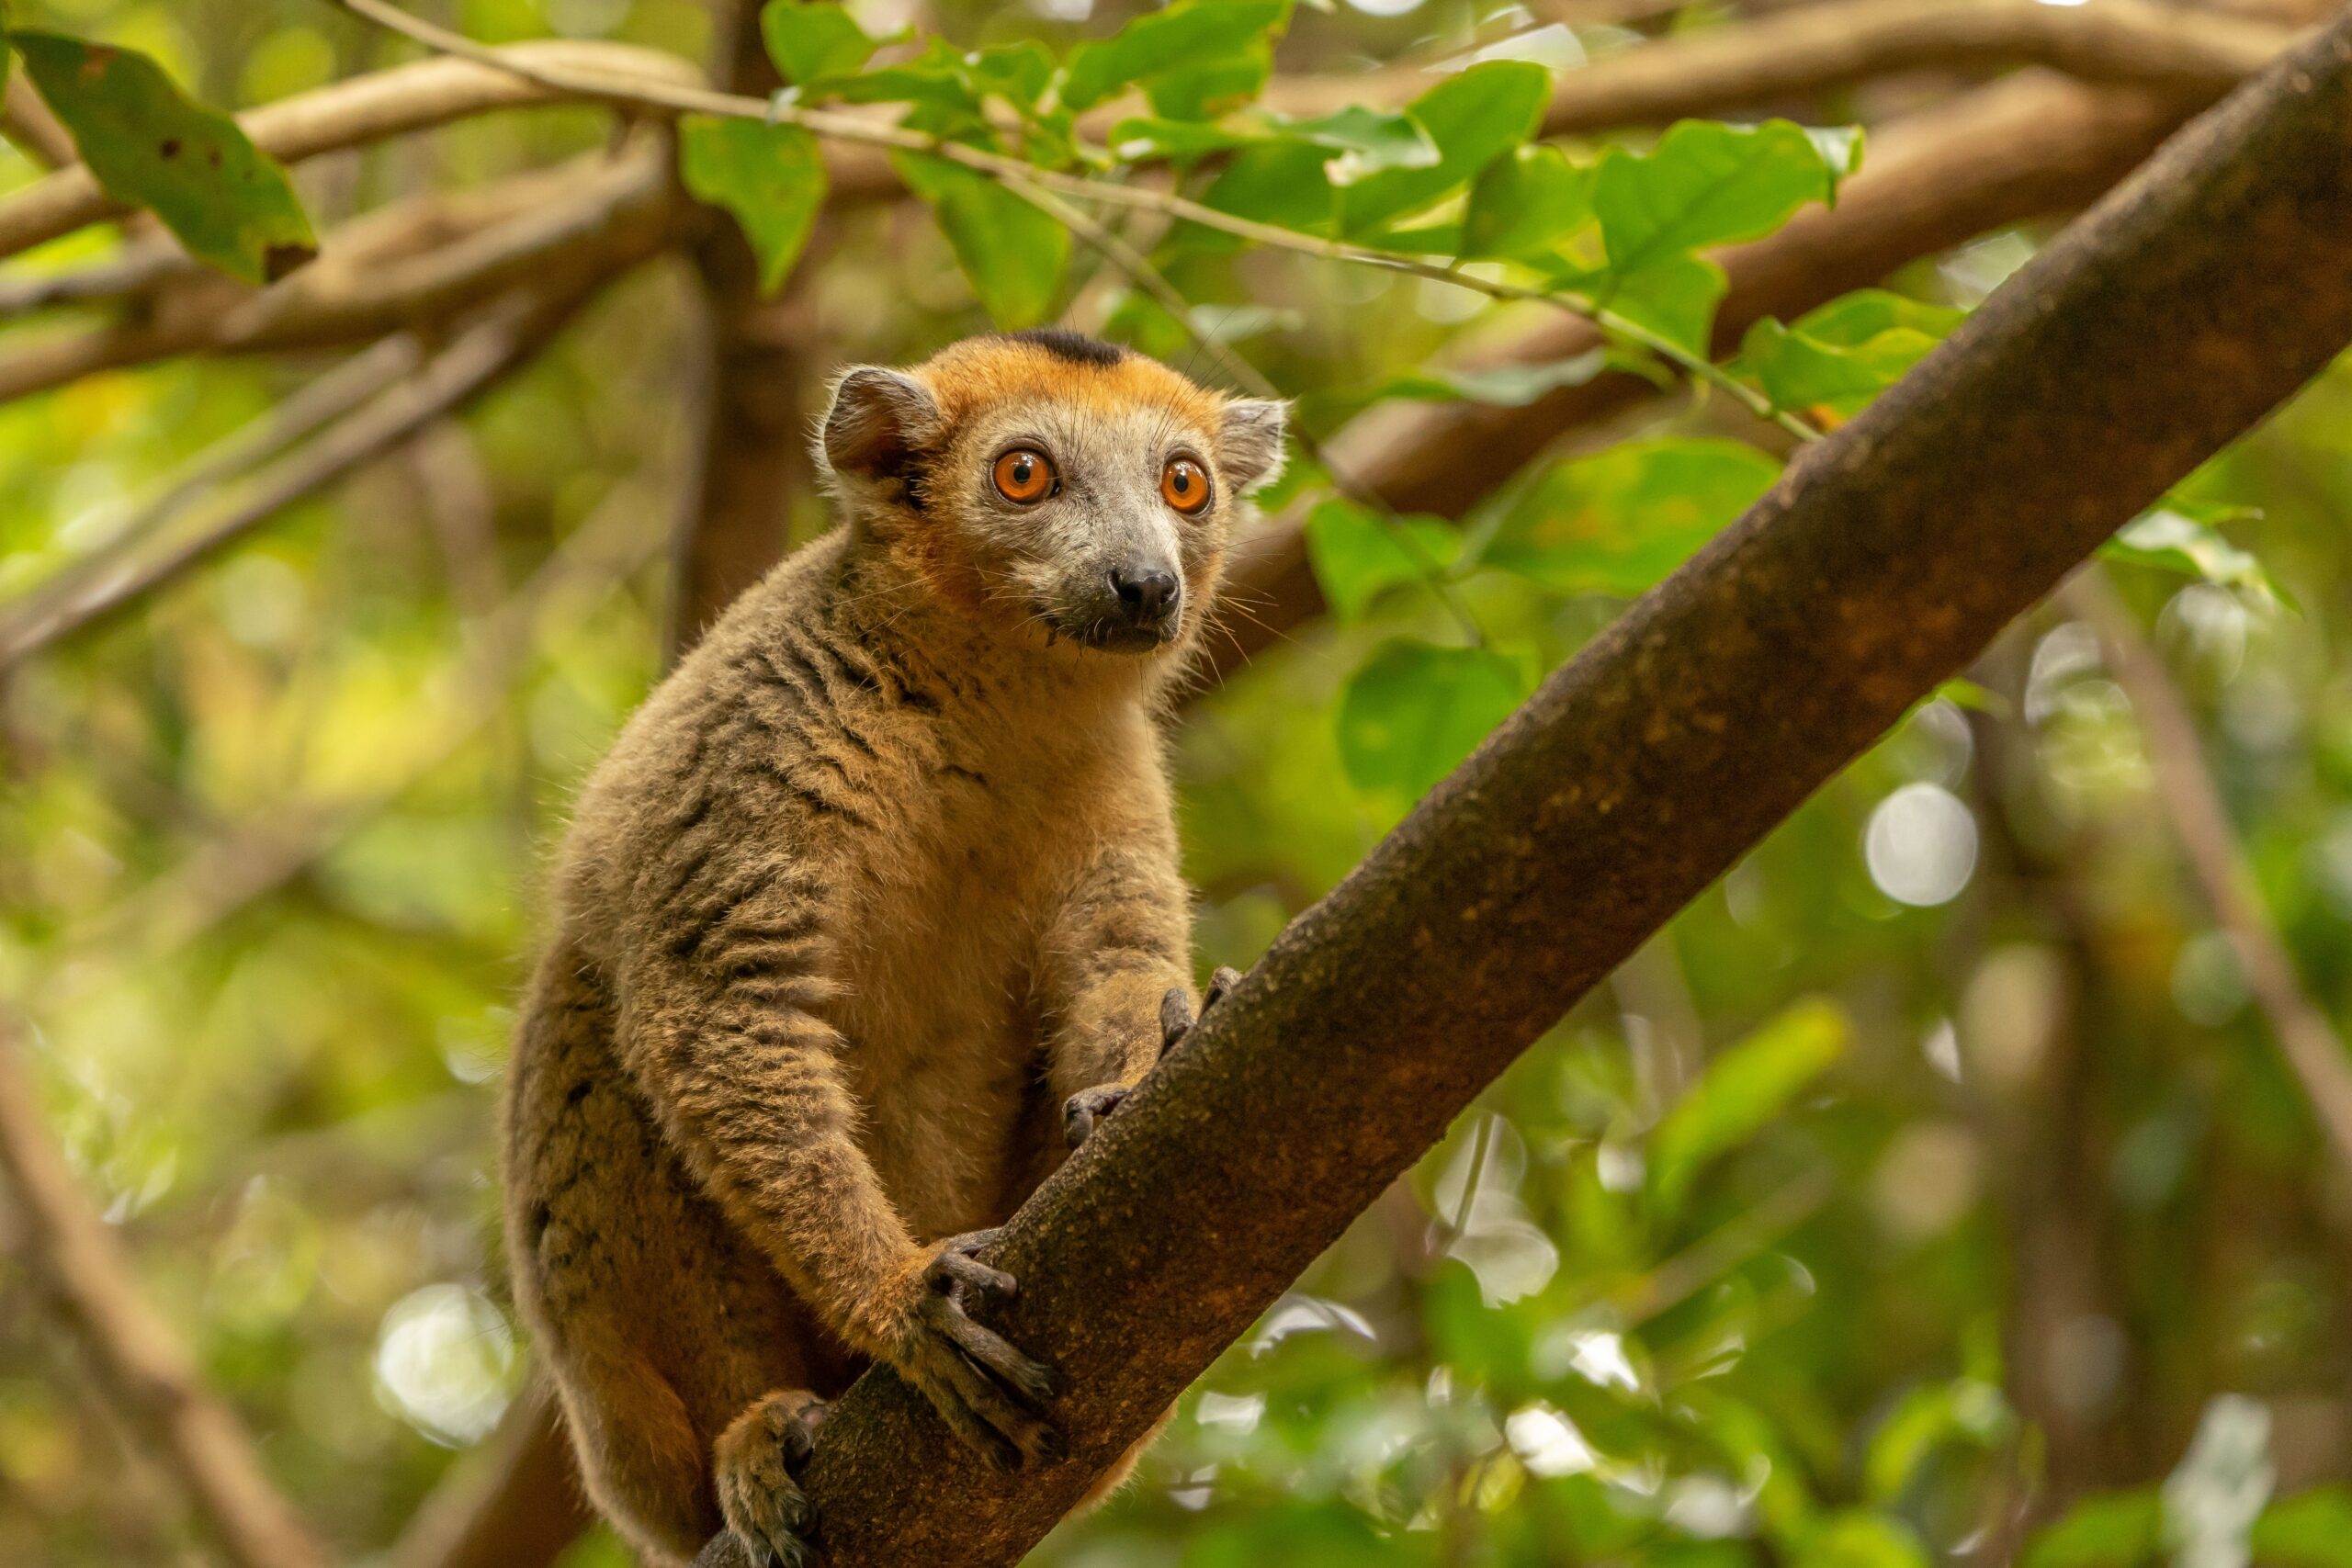 A lemur posed in a tree